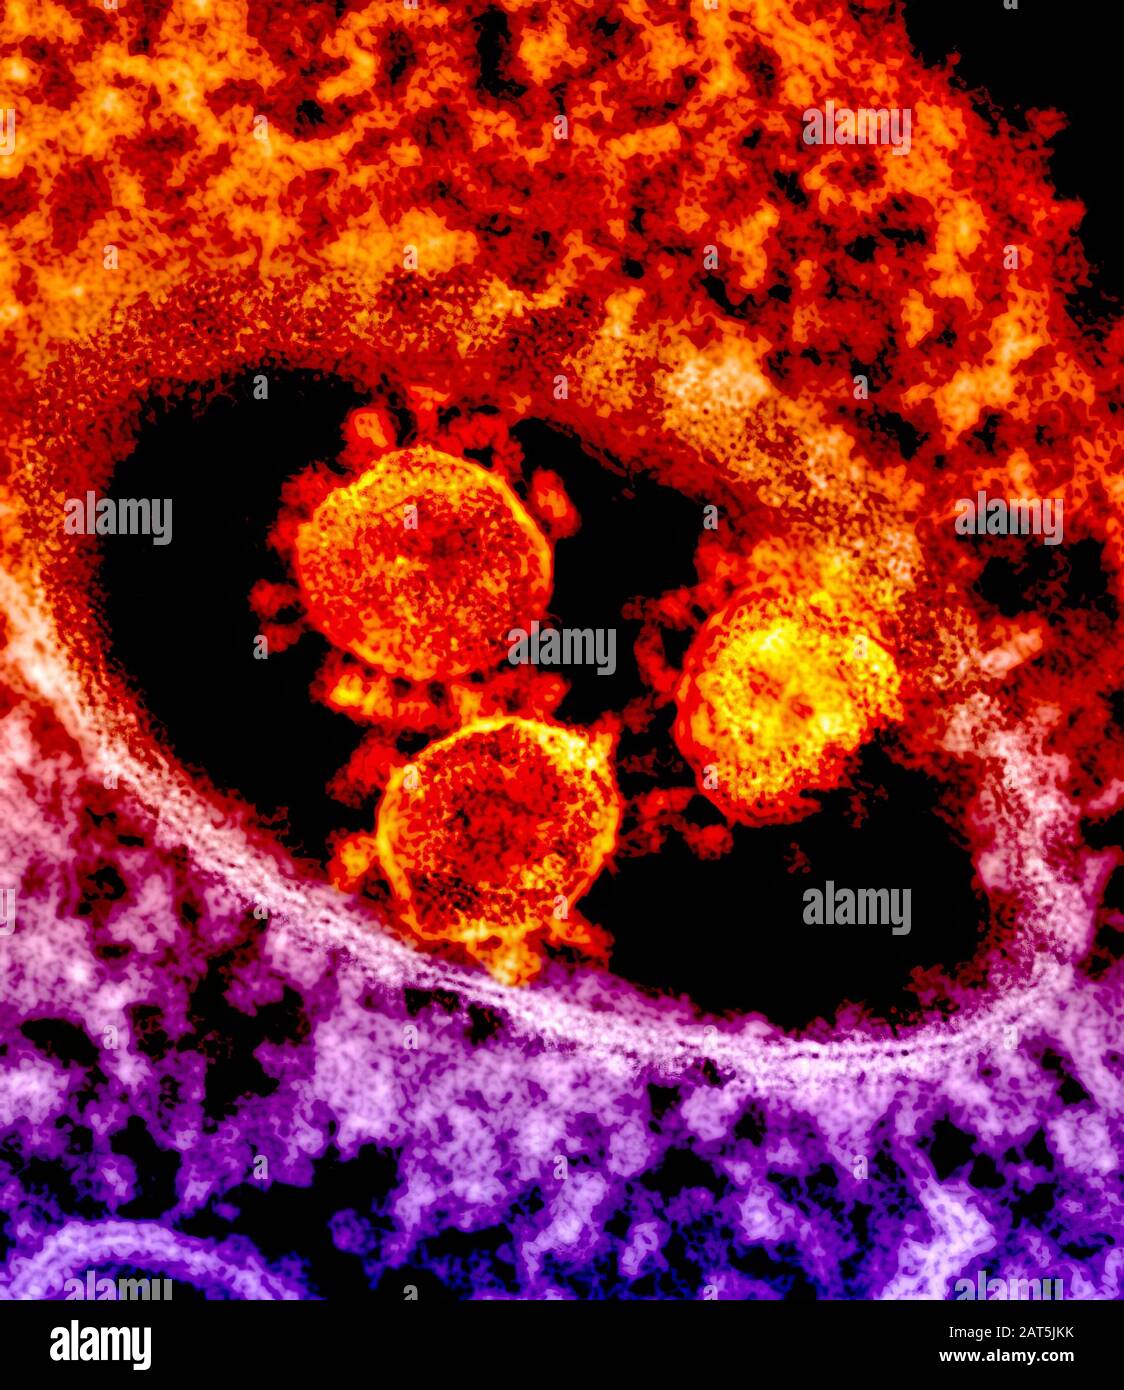 MERS Coronavirus. Middle East Respiratory Syndrome (MERS) is viral respiratory illness that is new to humans. It was first reported in Saudi Arabia in 2012 and has since spread to several other countries, including the United States. Most people infected with MERS-CoV developed severe respiratory illness, including fever, cough, and shortness of breath. Many of them have died. Stock Photo